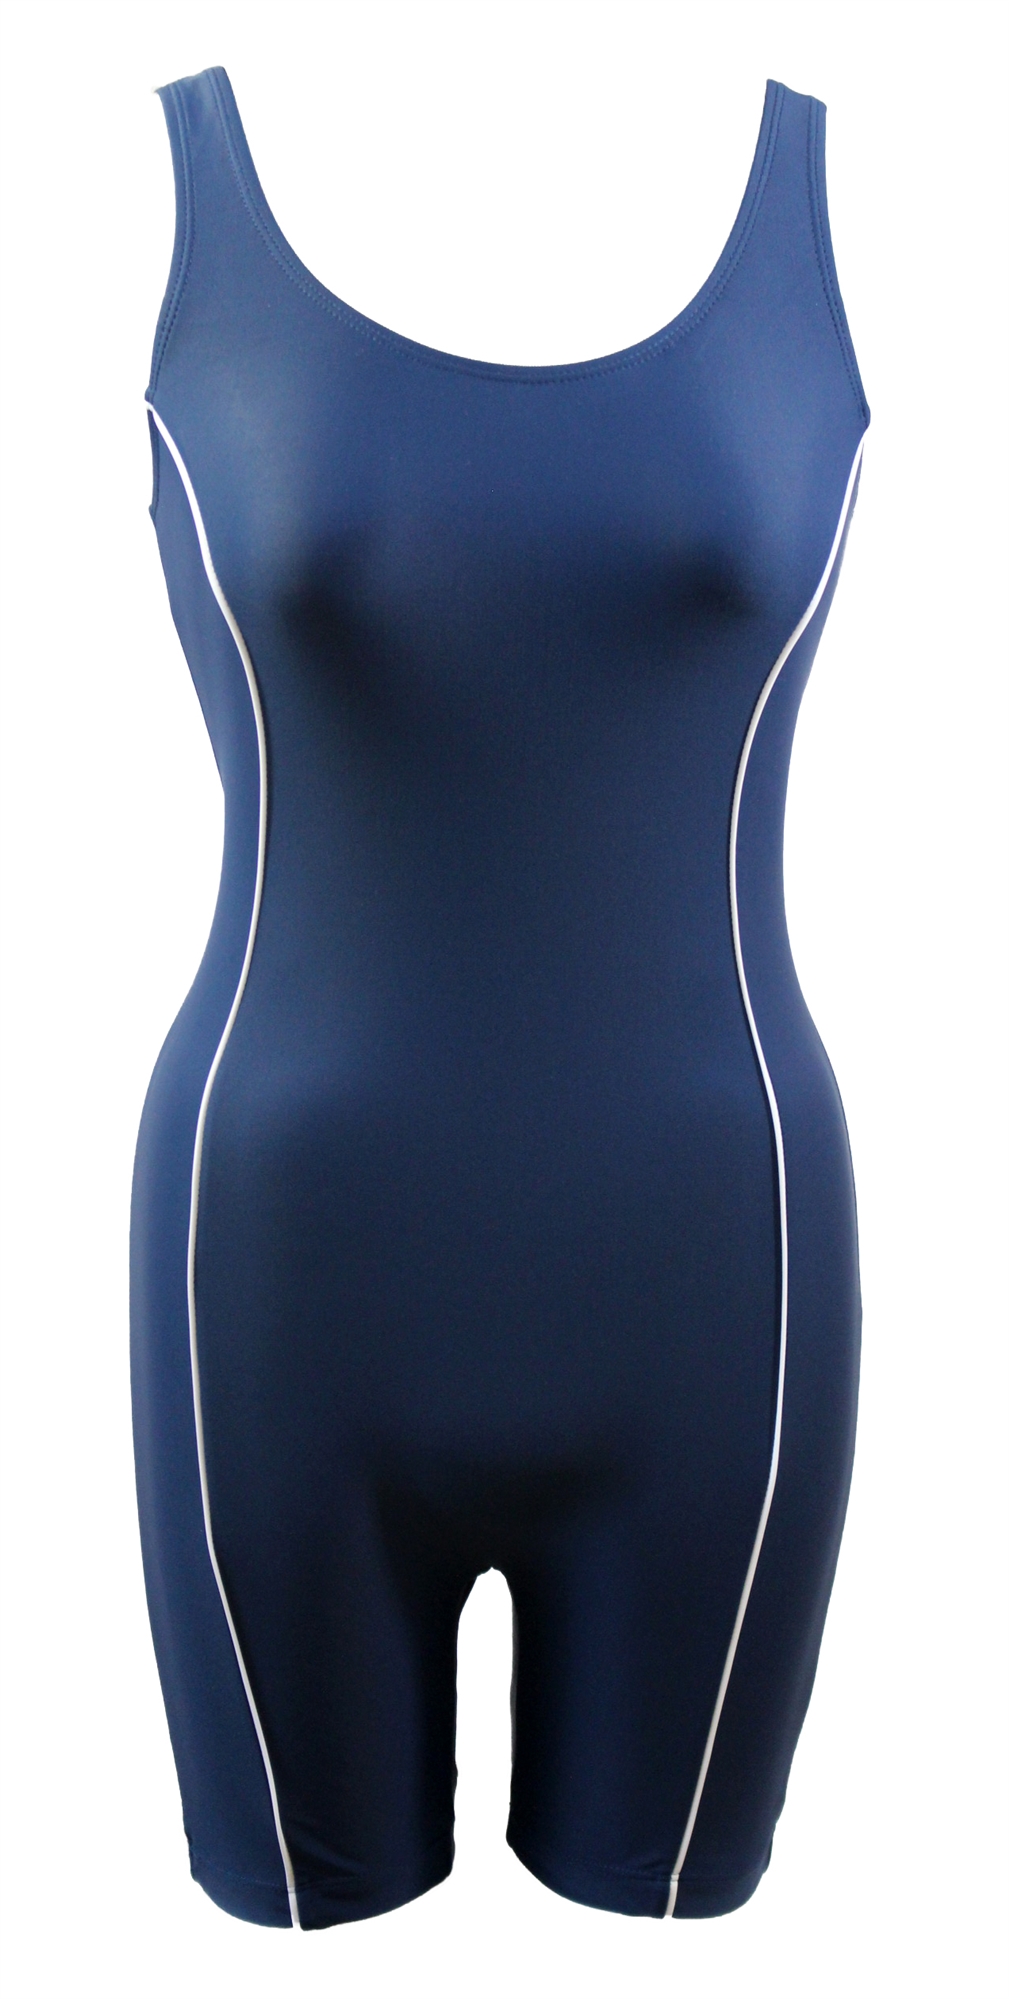 Adoretex Women's Xtra Life Lycra Unitard Swimsuit in Navy, Size X-Small - image 5 of 5